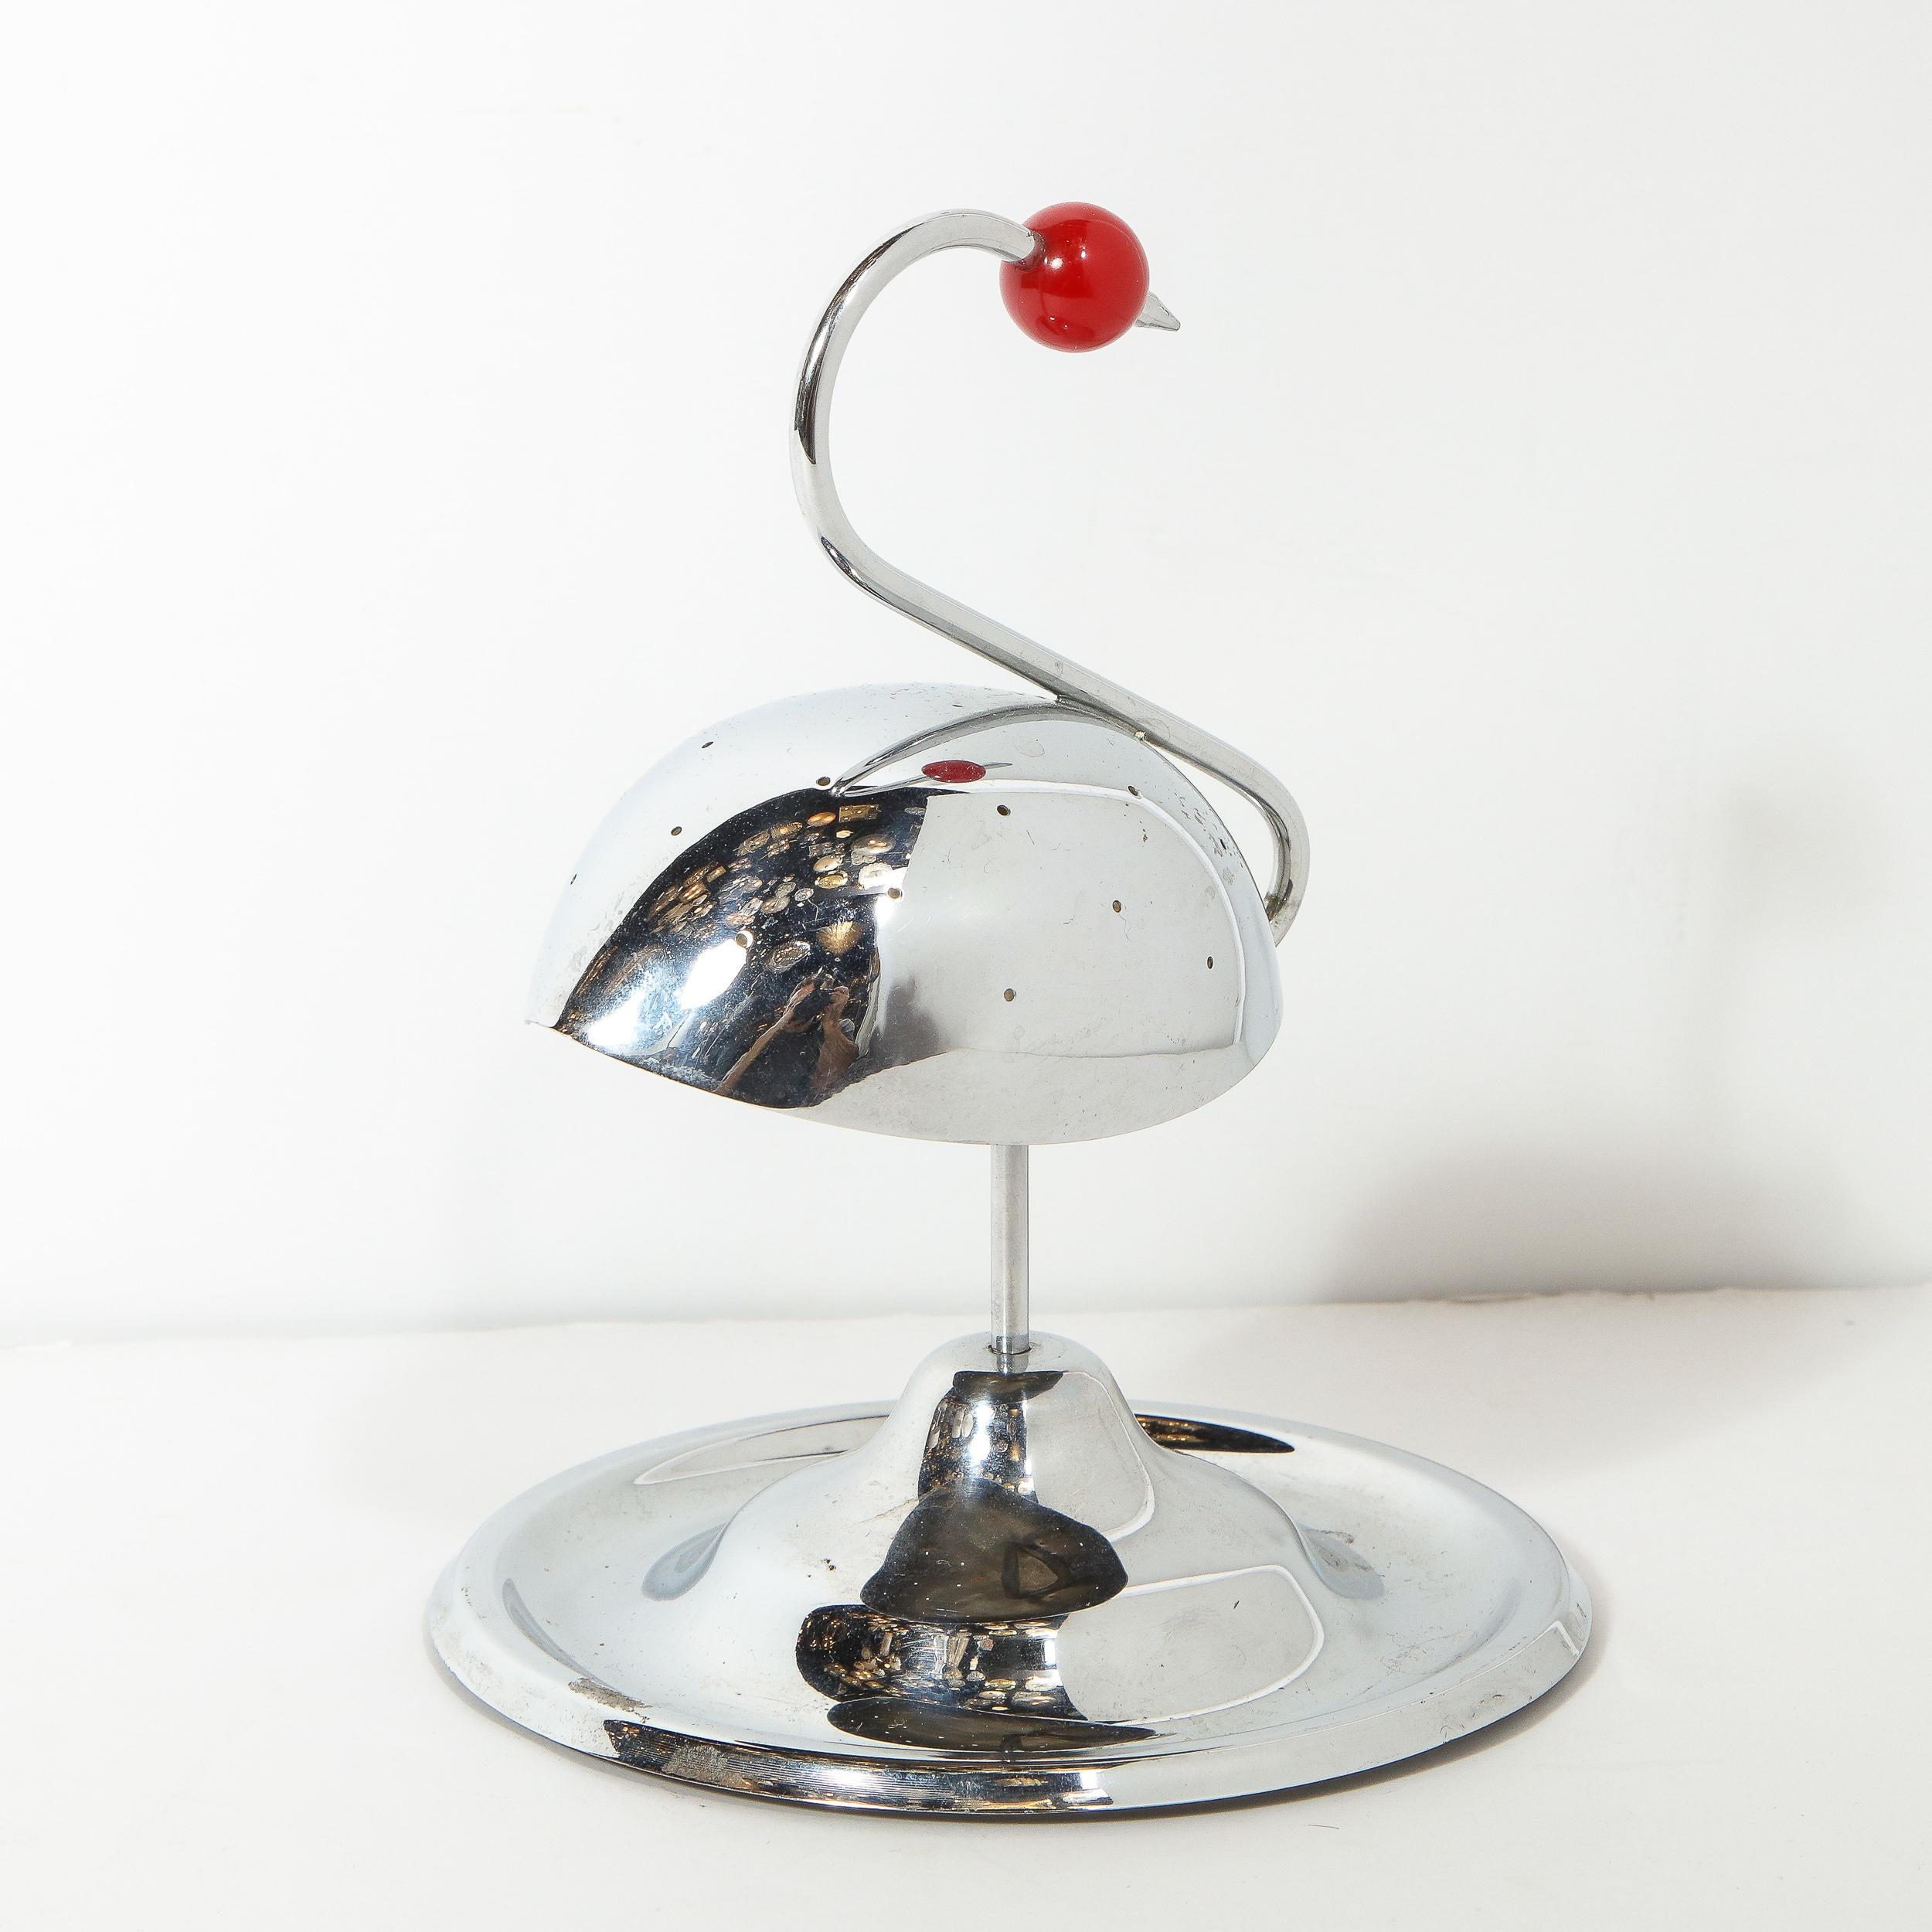 Mid-20th Century Art Deco Chrome and Carnelian Bakelite Stylized Swan Cocktail Holder by Napier